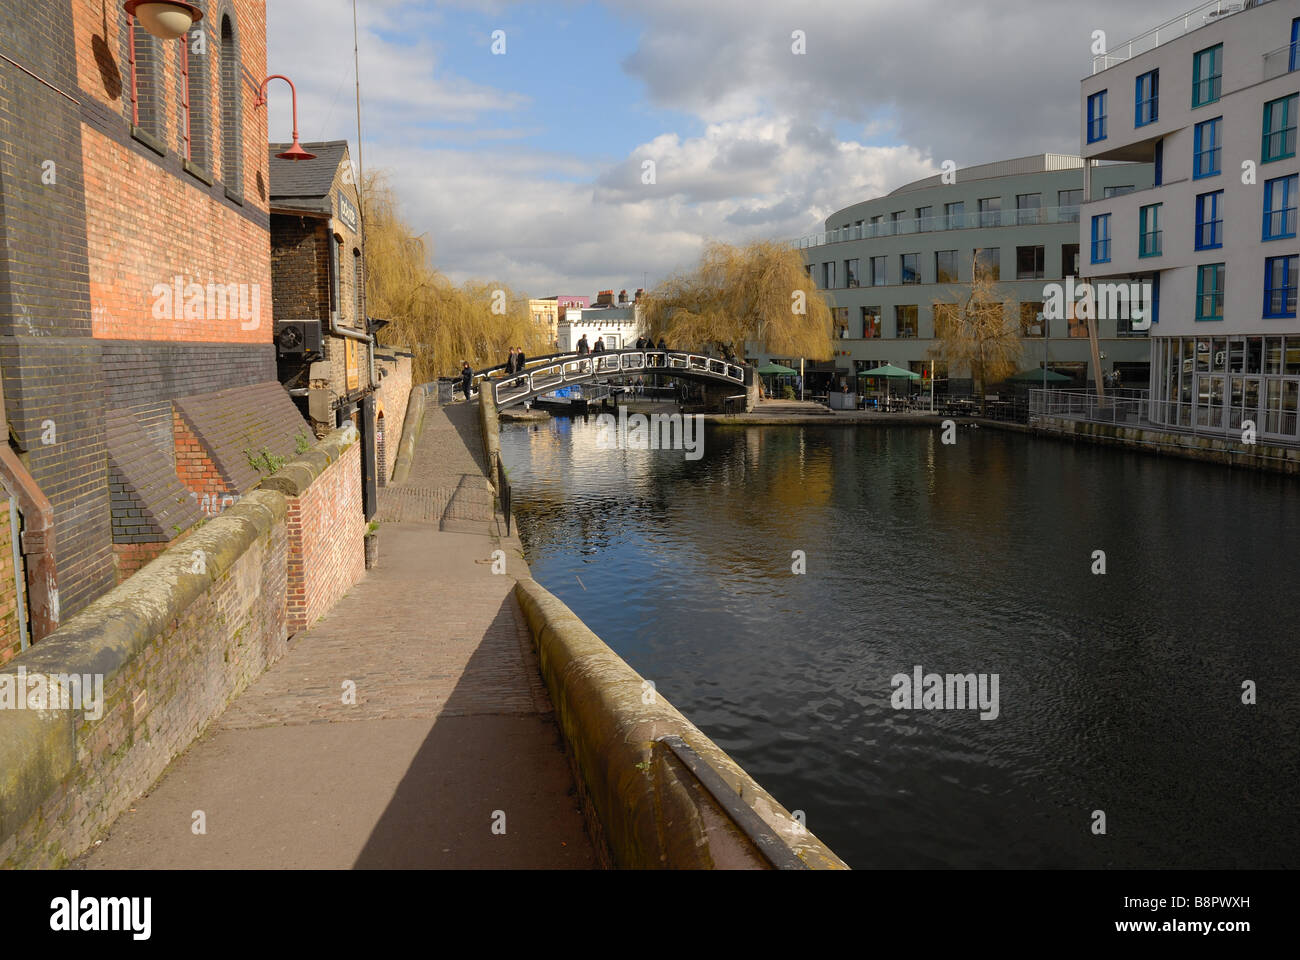 Regents Canal at Camden Town London Stock Photo